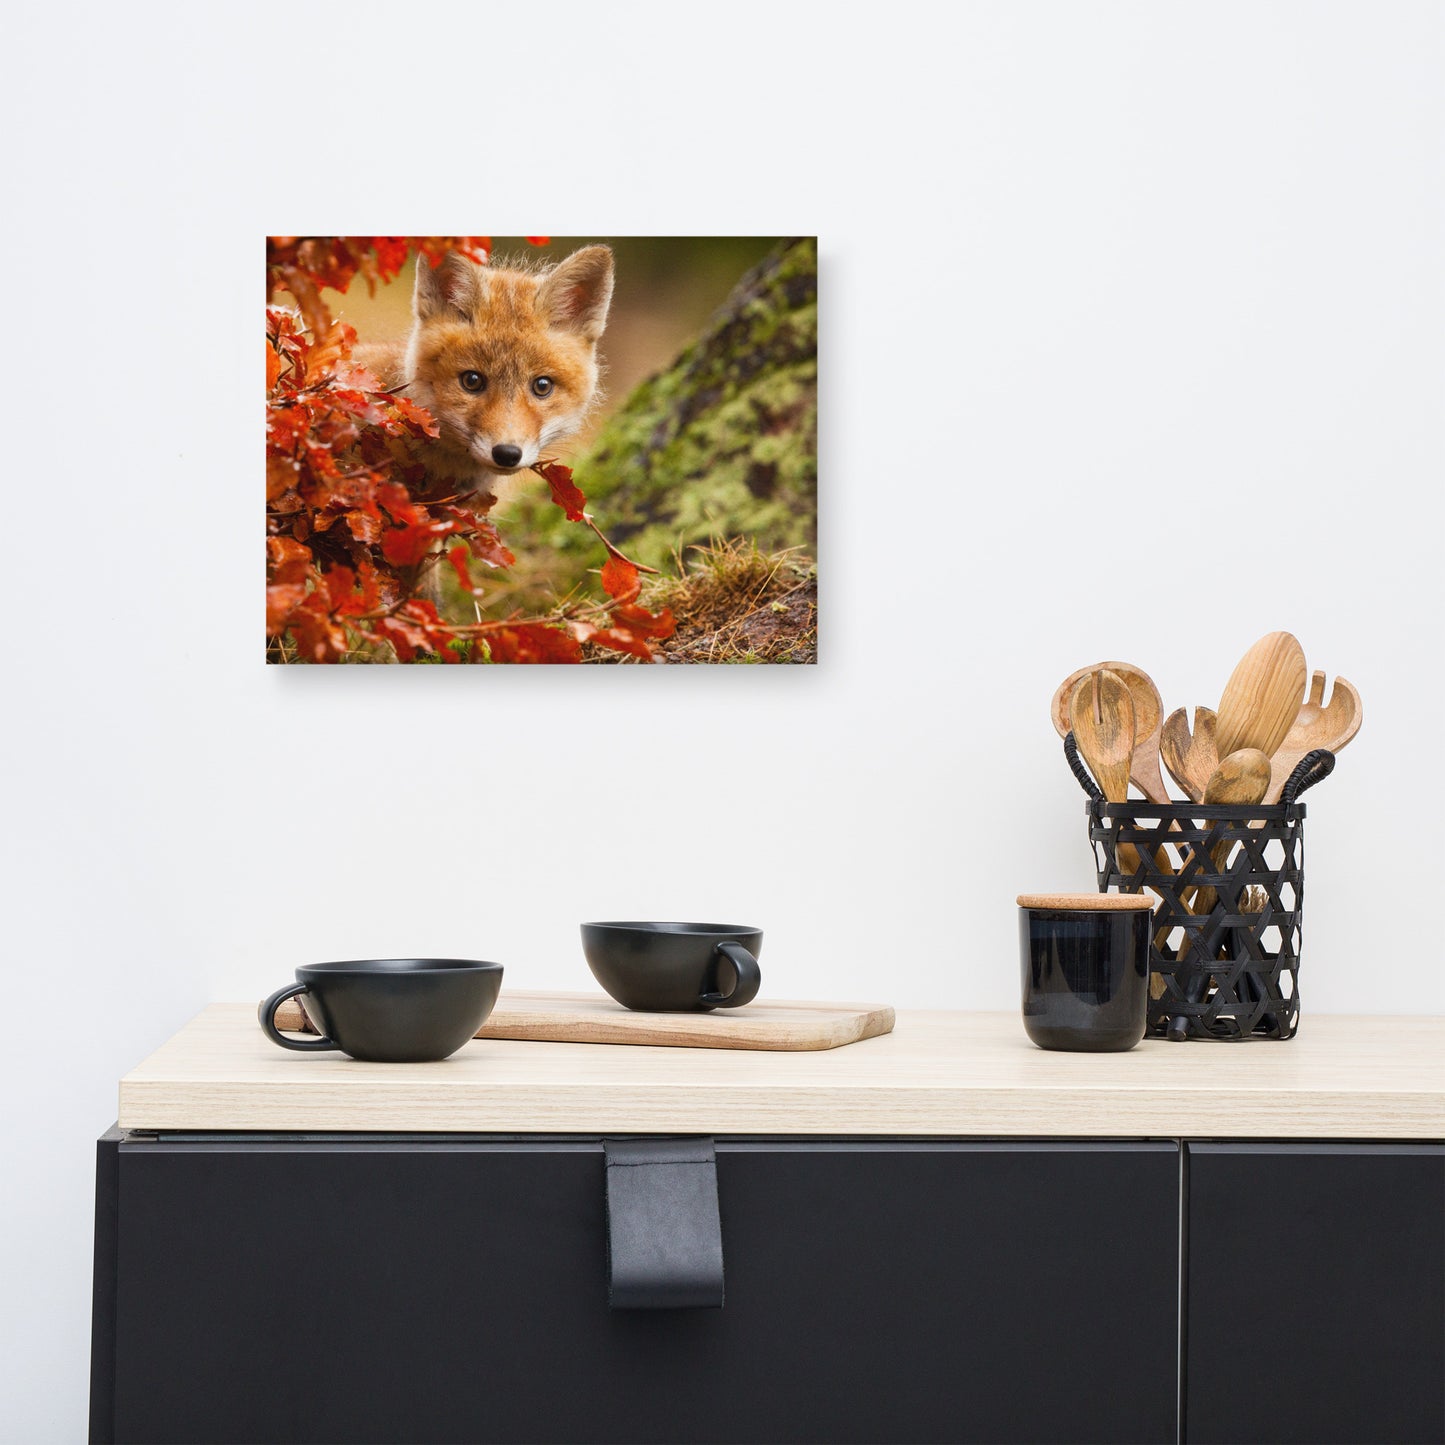 Animal Canvas Prints For Nursery: Peek-A-Boo Baby Fox Pup And Fall Leaves - Animal / Wildlife / Nature Photograph Canvas Artwork - Wall Decor